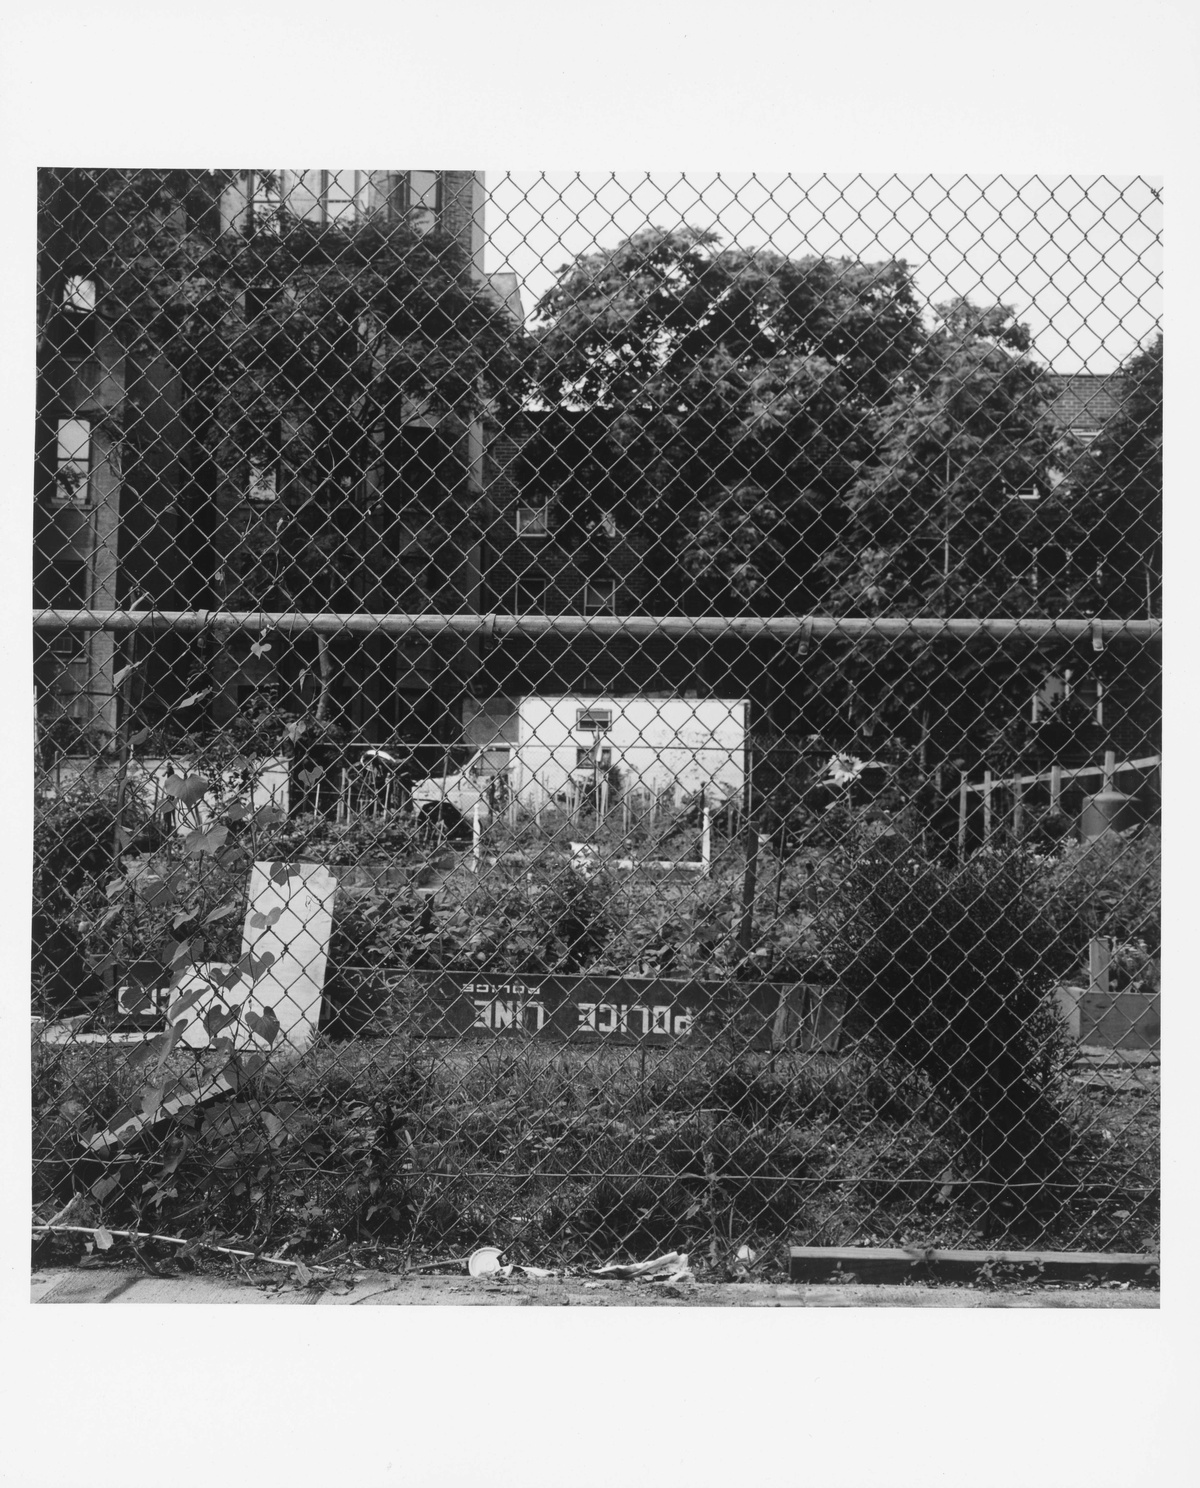 A black & white image of a rundown garden with a fence in the foreground, upside down “Police Line” barrier in the midground, and trucks and buildings in the background.